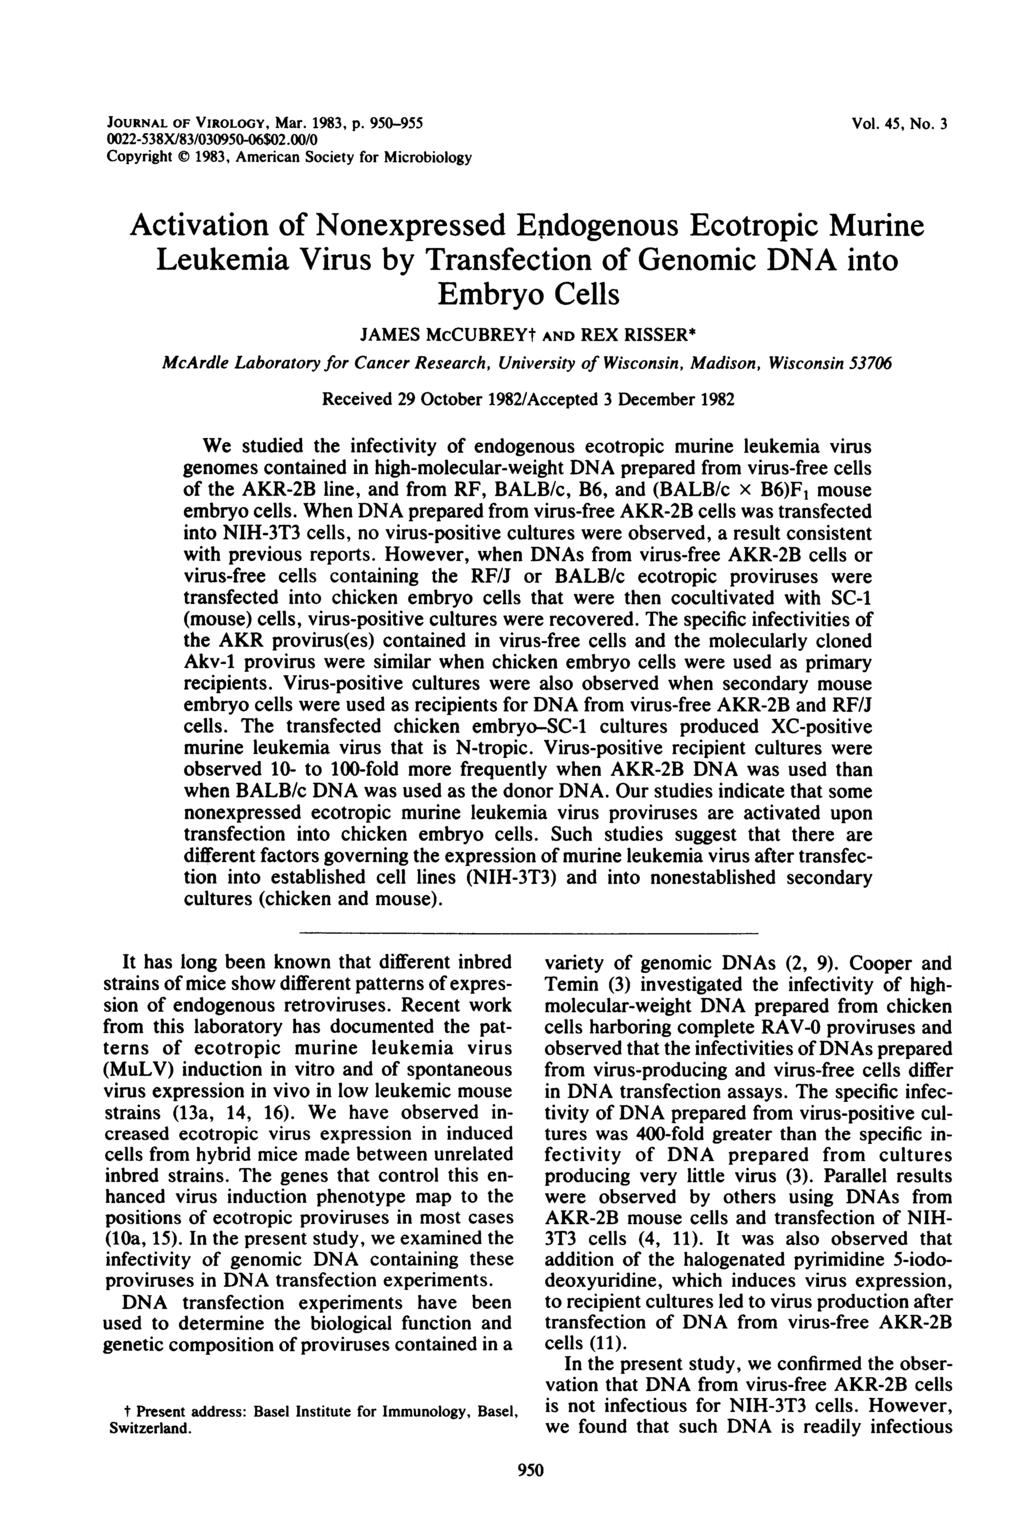 JOURNAL OF VIROLOGY, Mar. 1983, P. 950-955 0022-538X/83/030950-06$02.00/0 Copyright 1983, American Society for Microbiology Vol. 45, No.